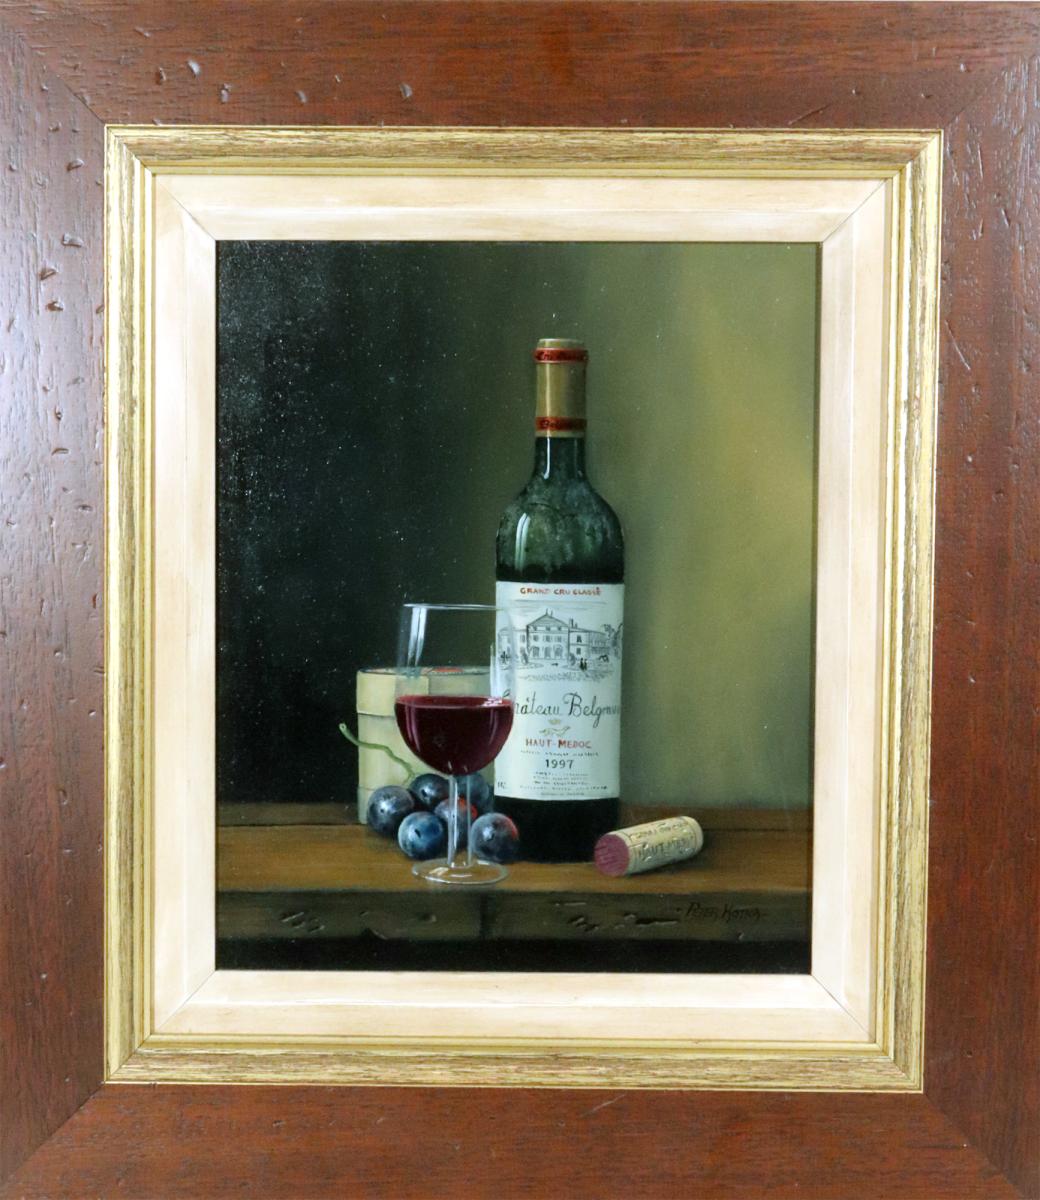 Peter A. Kotka, Stiil Life with Bottle of 1997 Chateau Belgrave Grand Cru Classe, Glass & Cheese